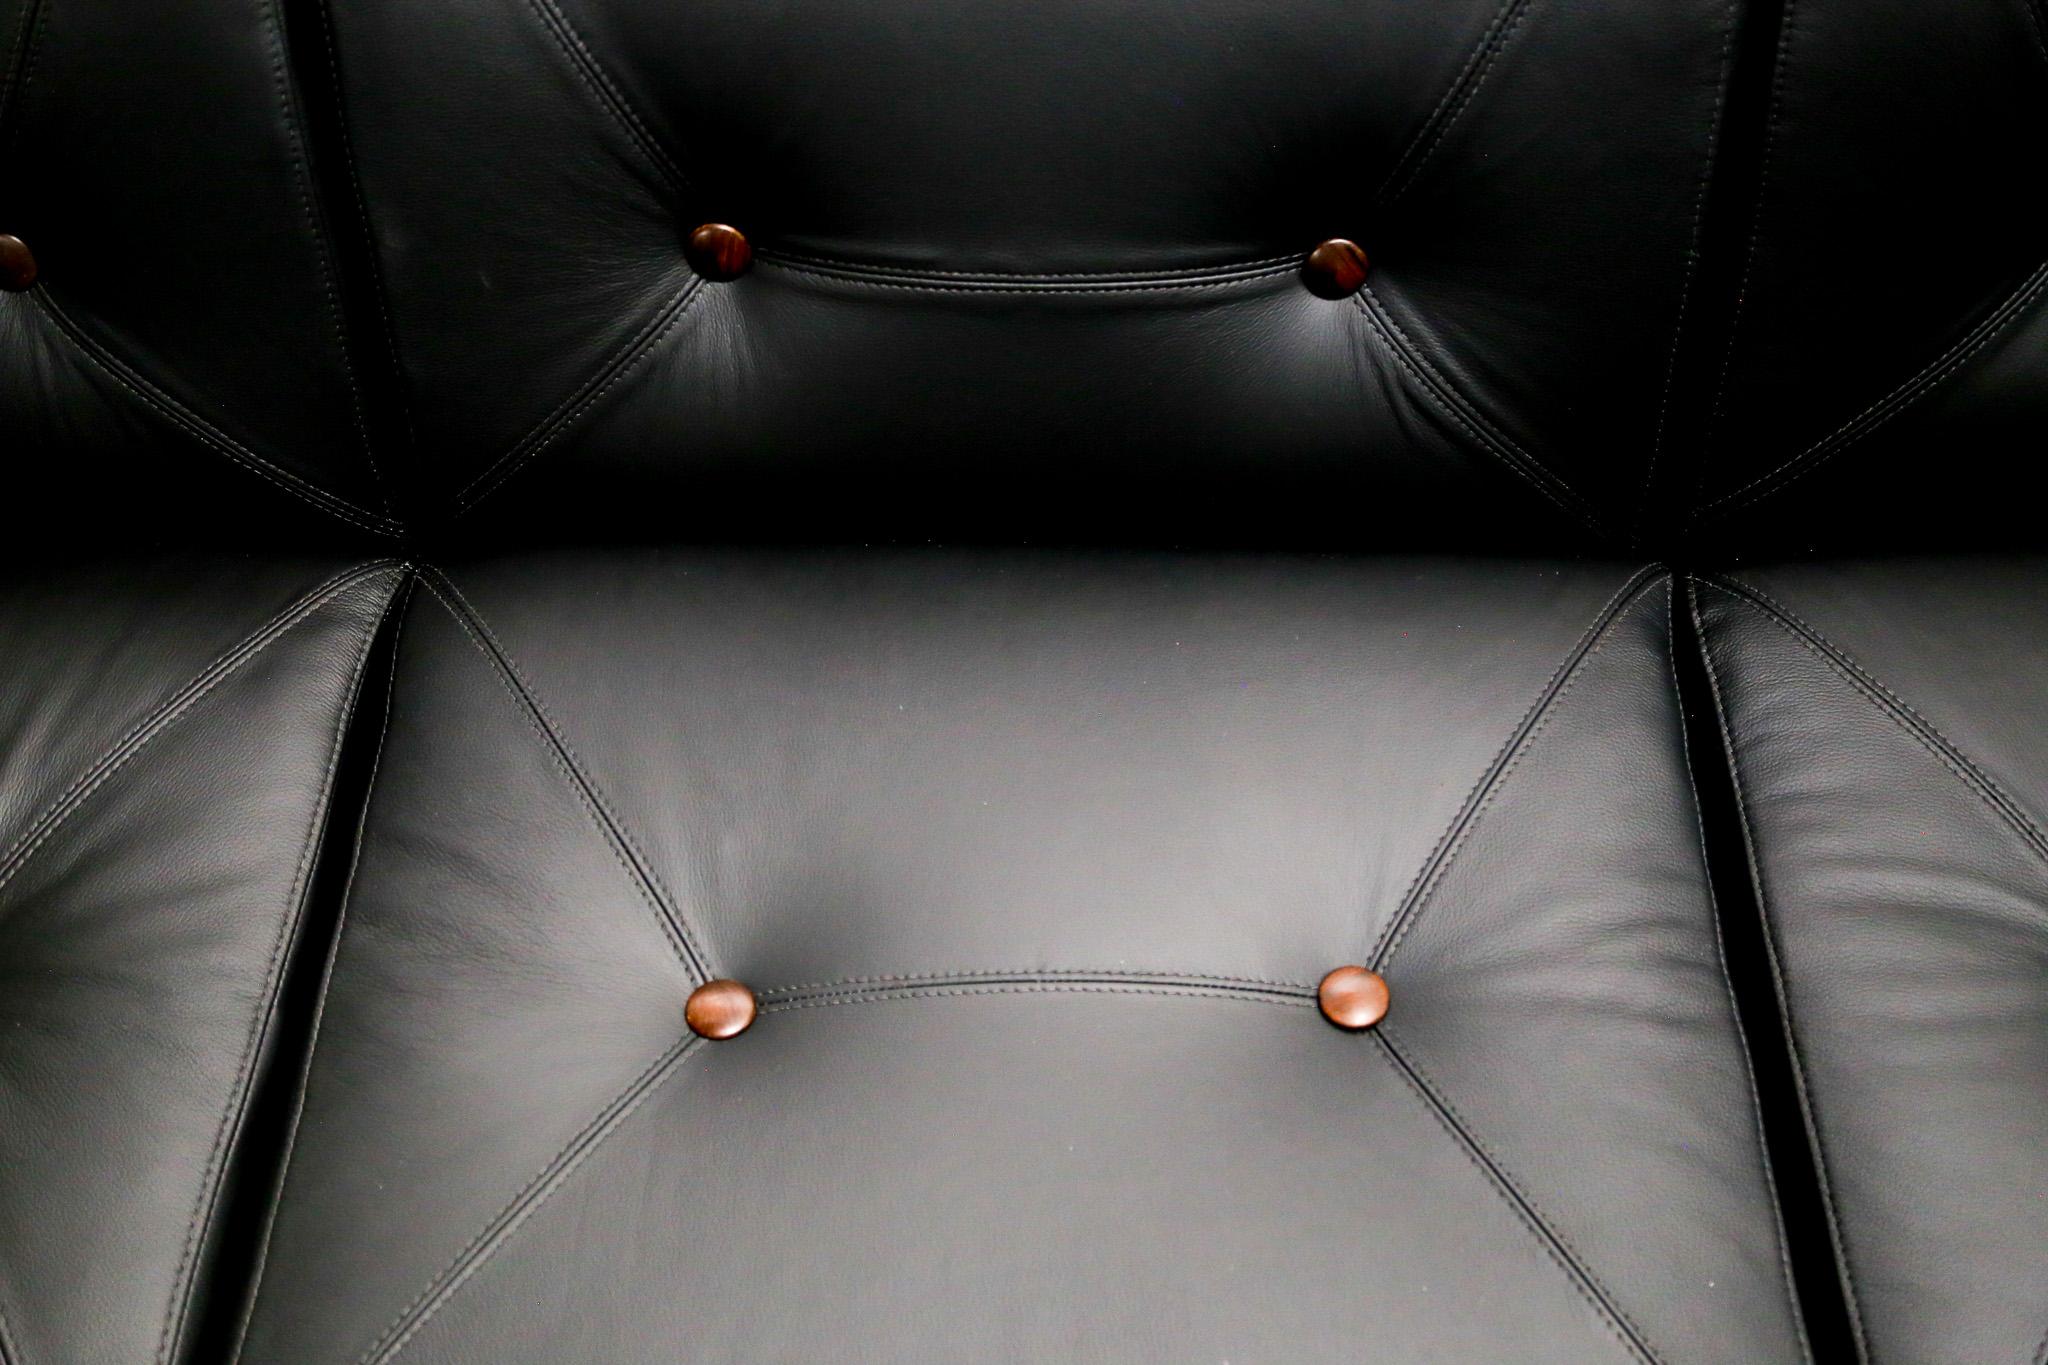 Mid-Century Modern Sofa in Black Leather & Wood by Jorge Zalszupin, Brazil, 1970 For Sale 6